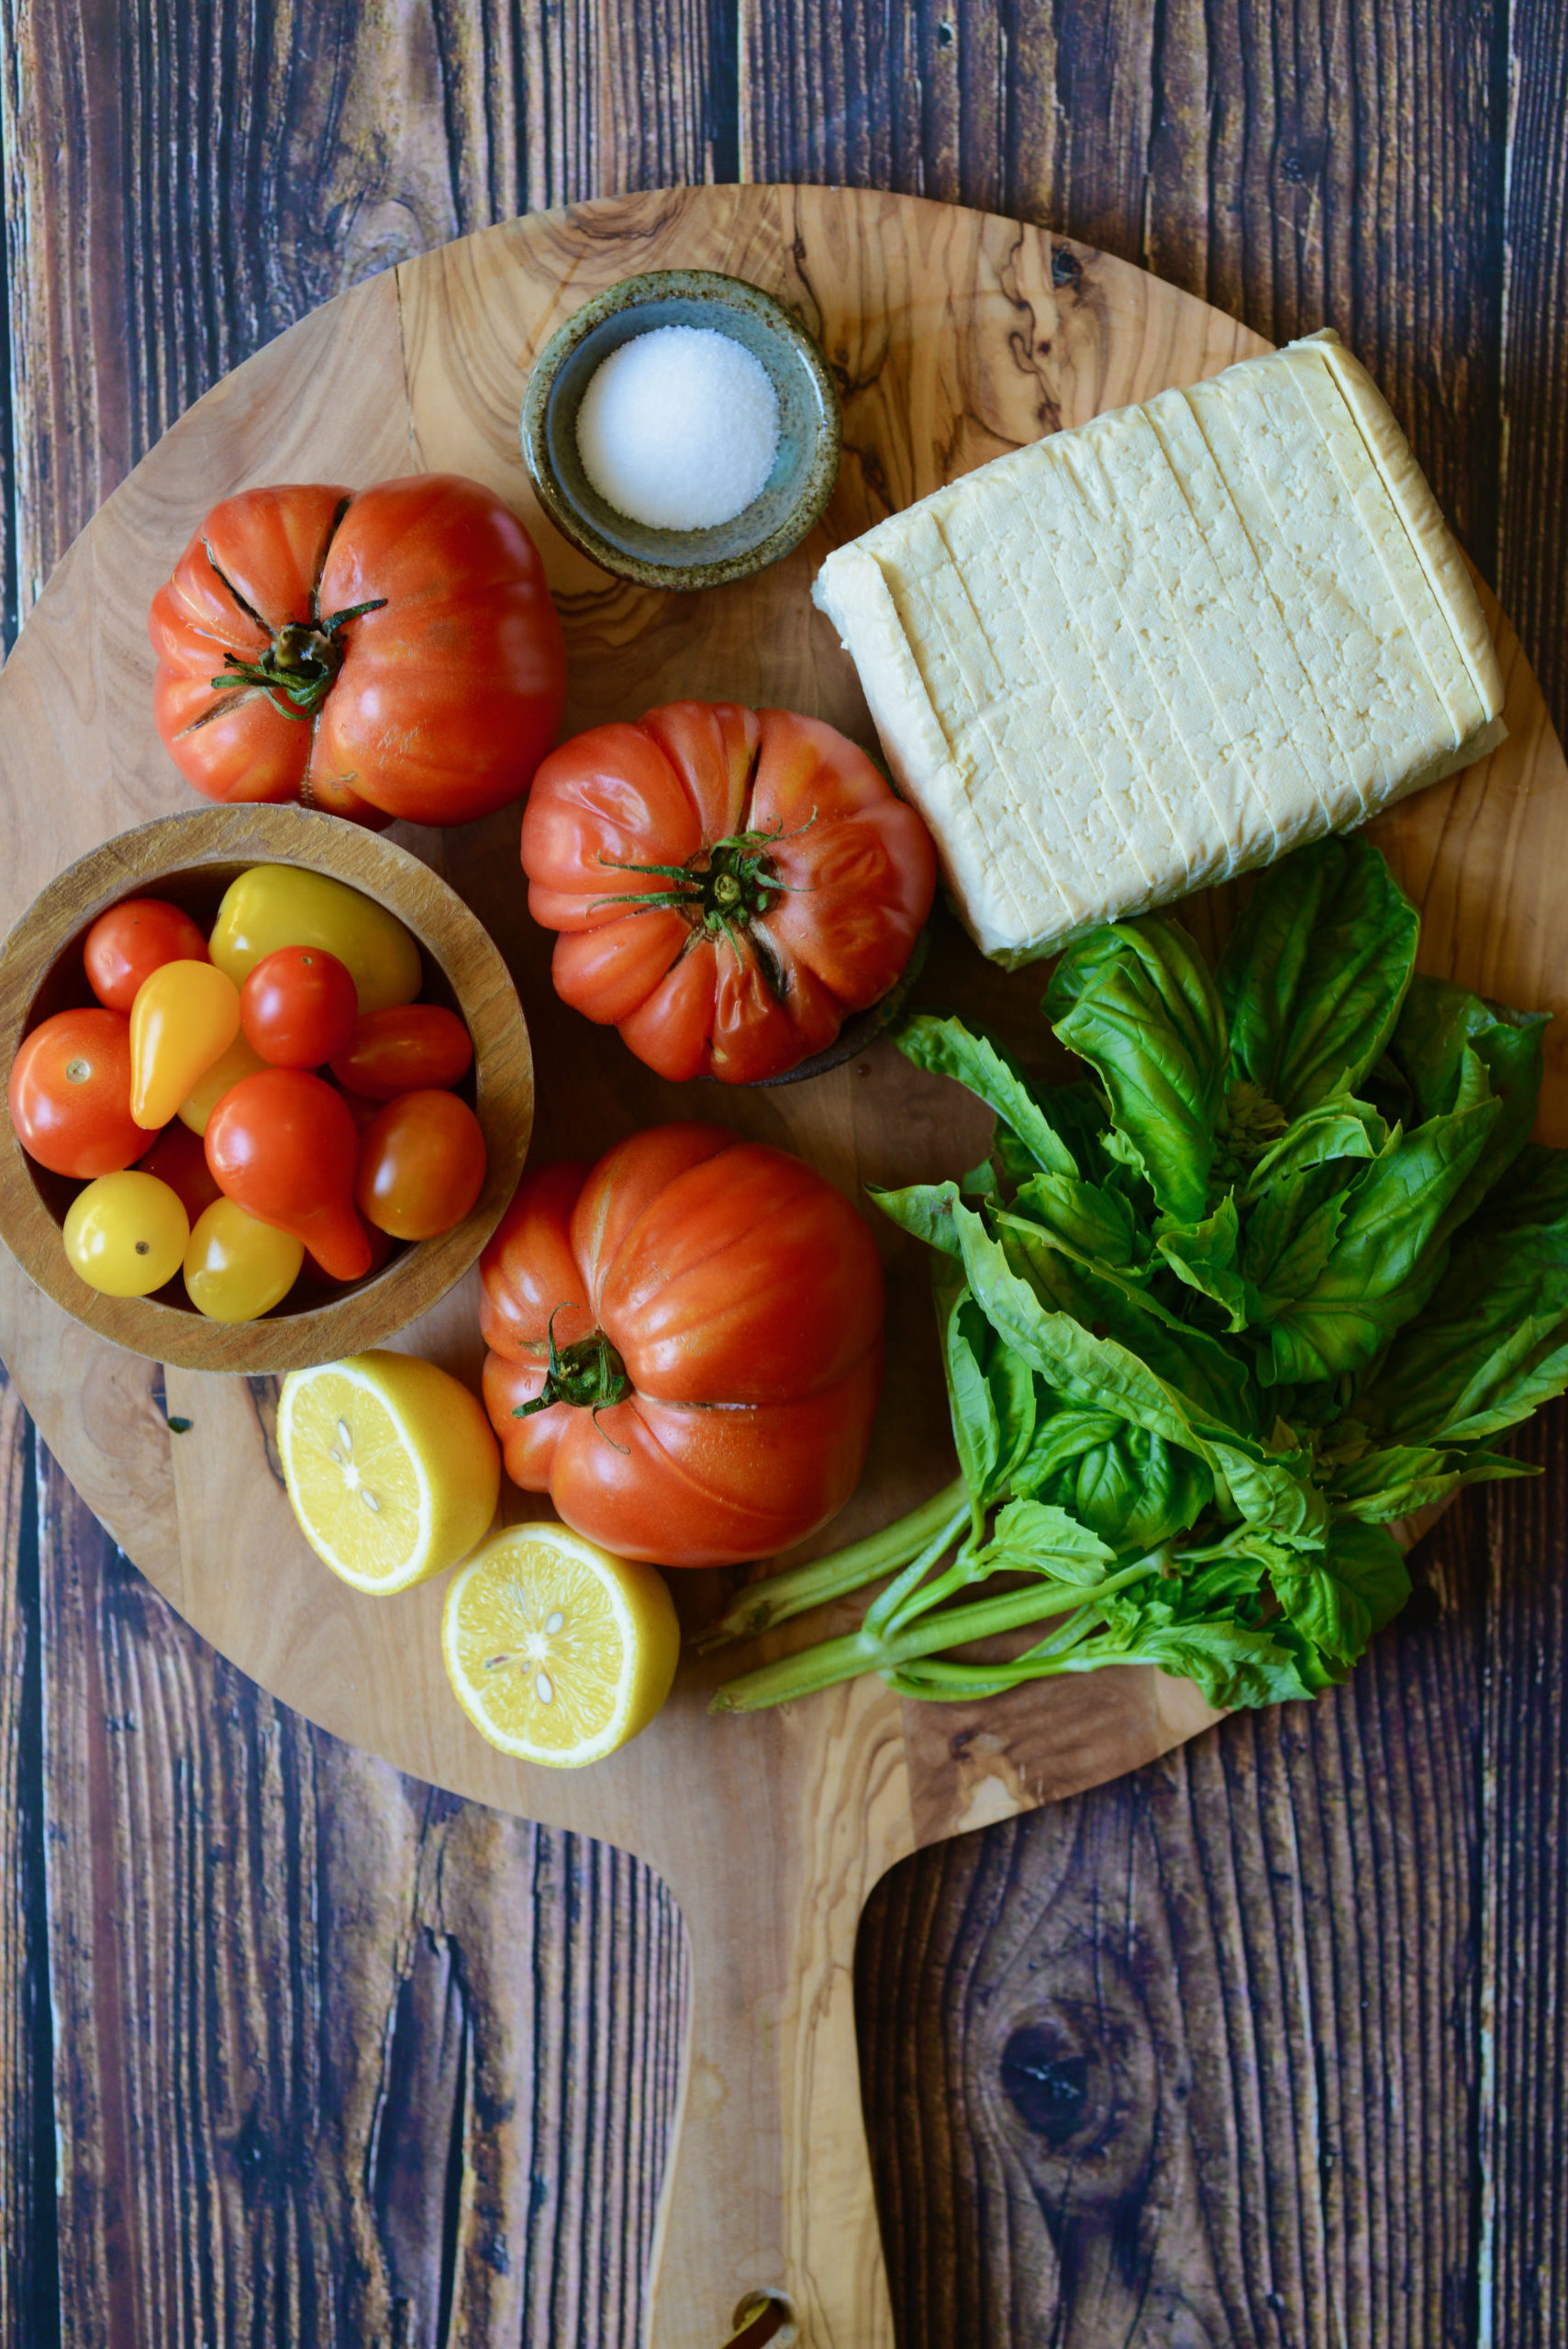 Ingredients for Vegan Caprese Salad - tomatoes (mix of large and small), super-firm tofu, salt, lemon, and fresh basil